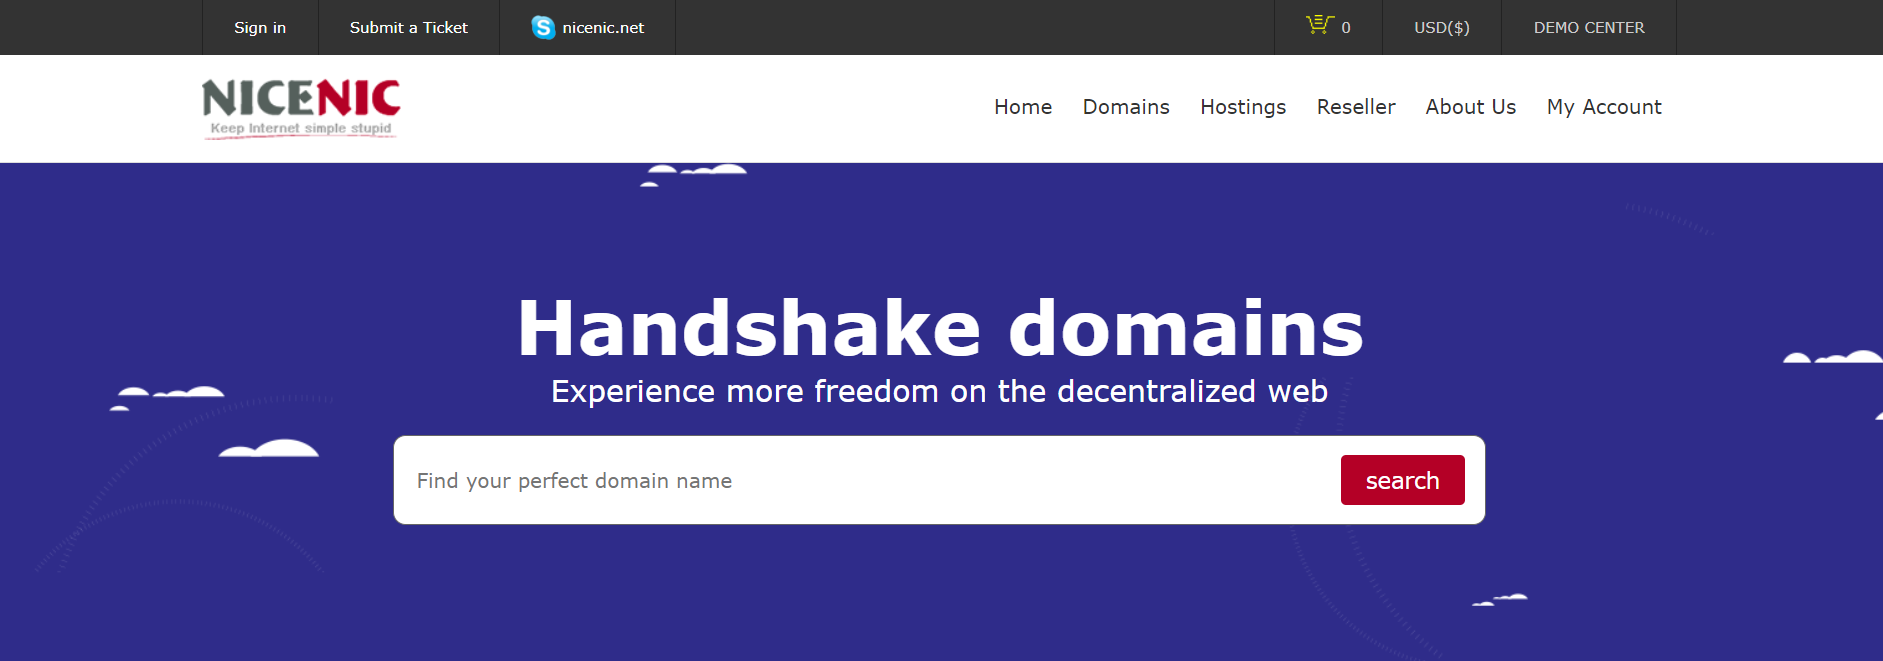 What are Handshake domains, and how do HNS work? | NiceNIC.NET